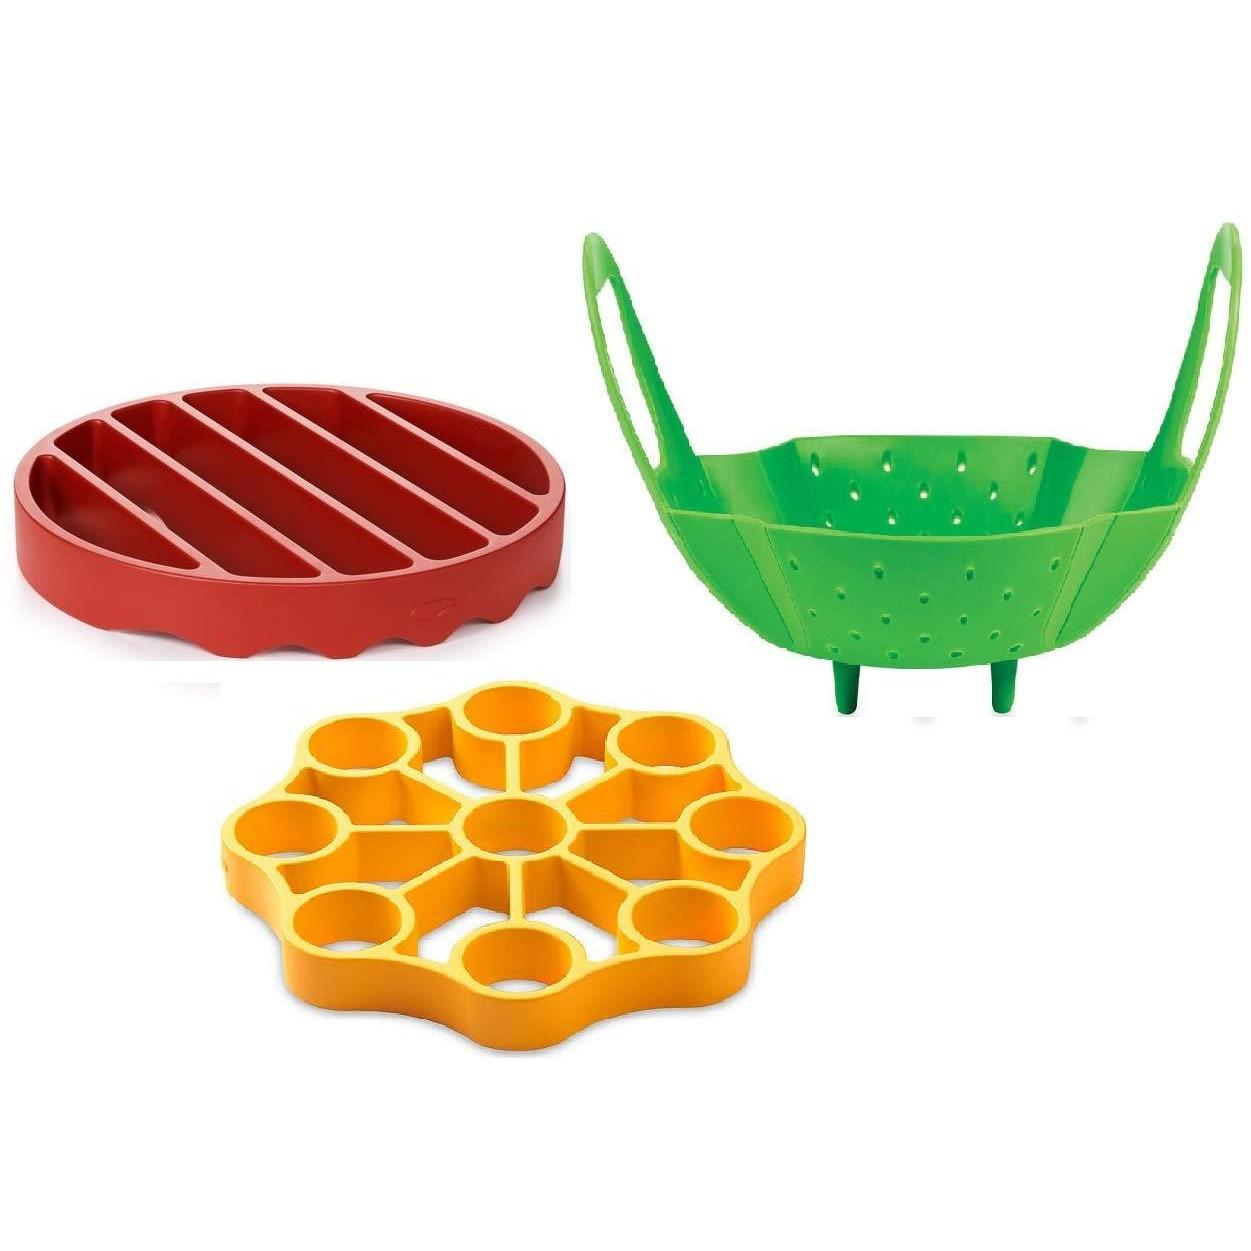 Silicone OXO Pressure Cooker Piece Egg Steamer Basket Cooking Rack, Red Yellow Green Insta-Pot Accesorie - UproMax